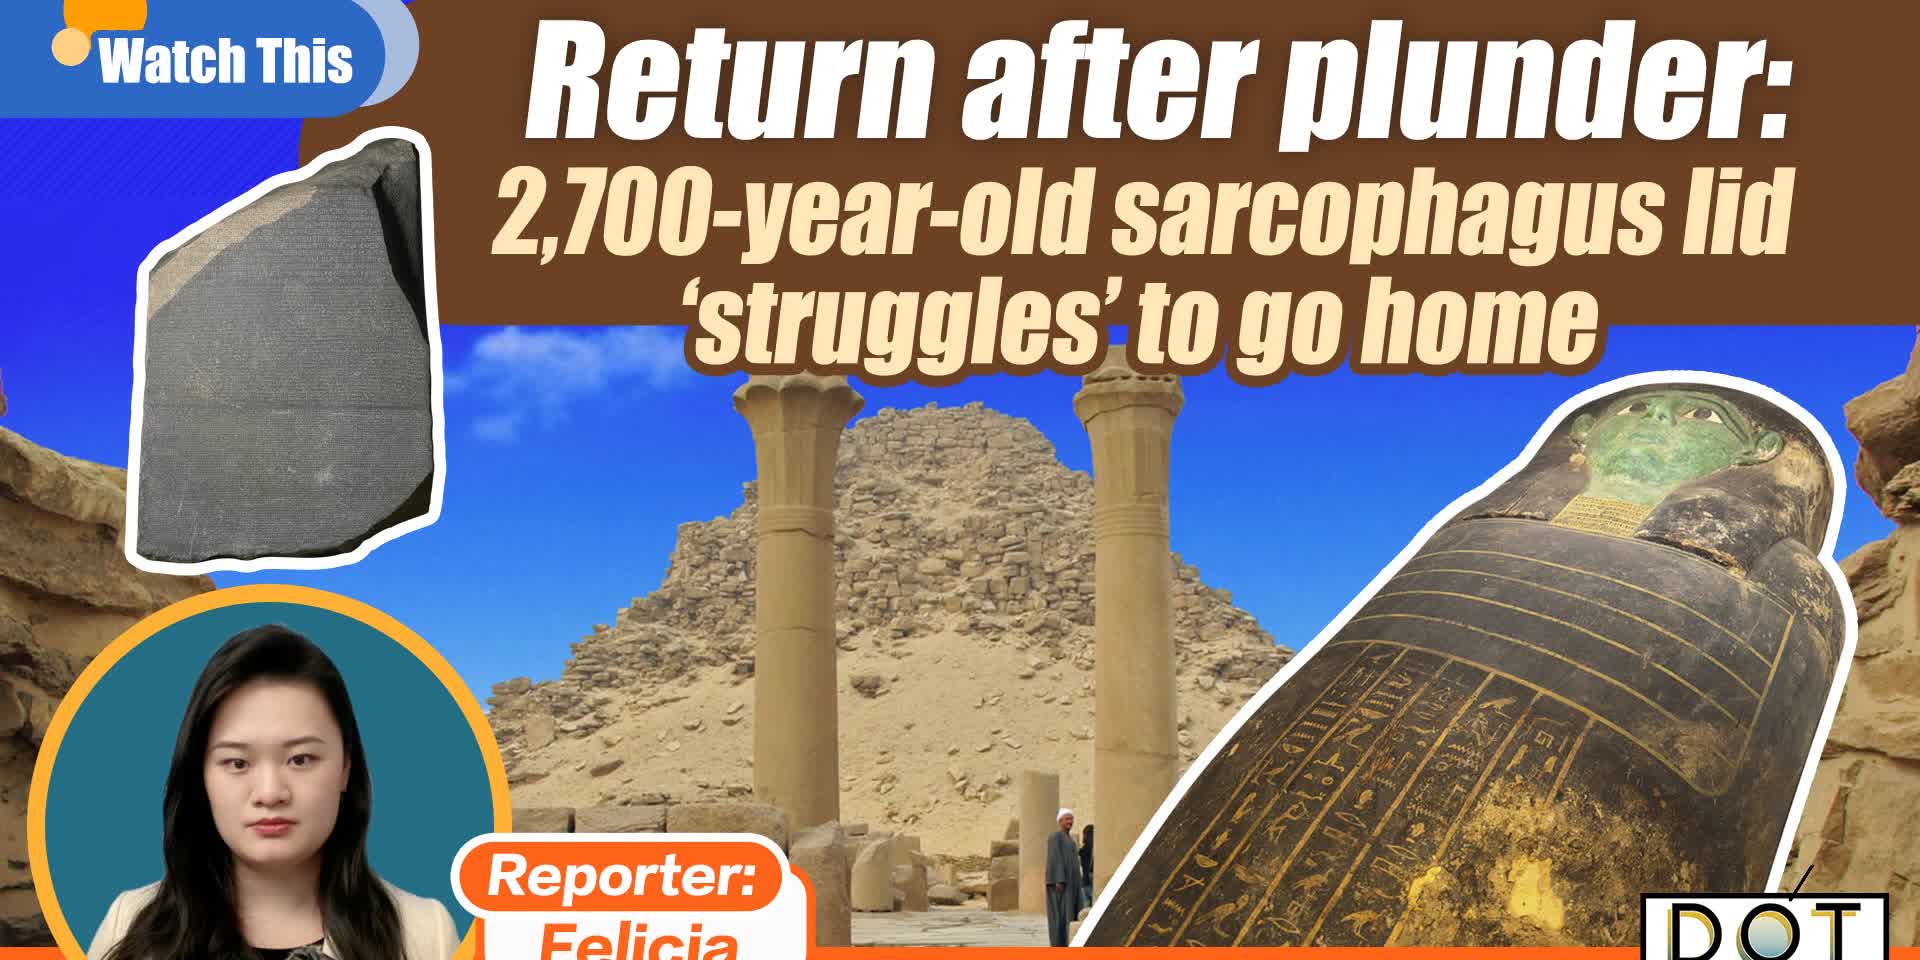 Watch This | Return after plunder: 2,700-year-old sarcophagus lid 'struggles' to go home